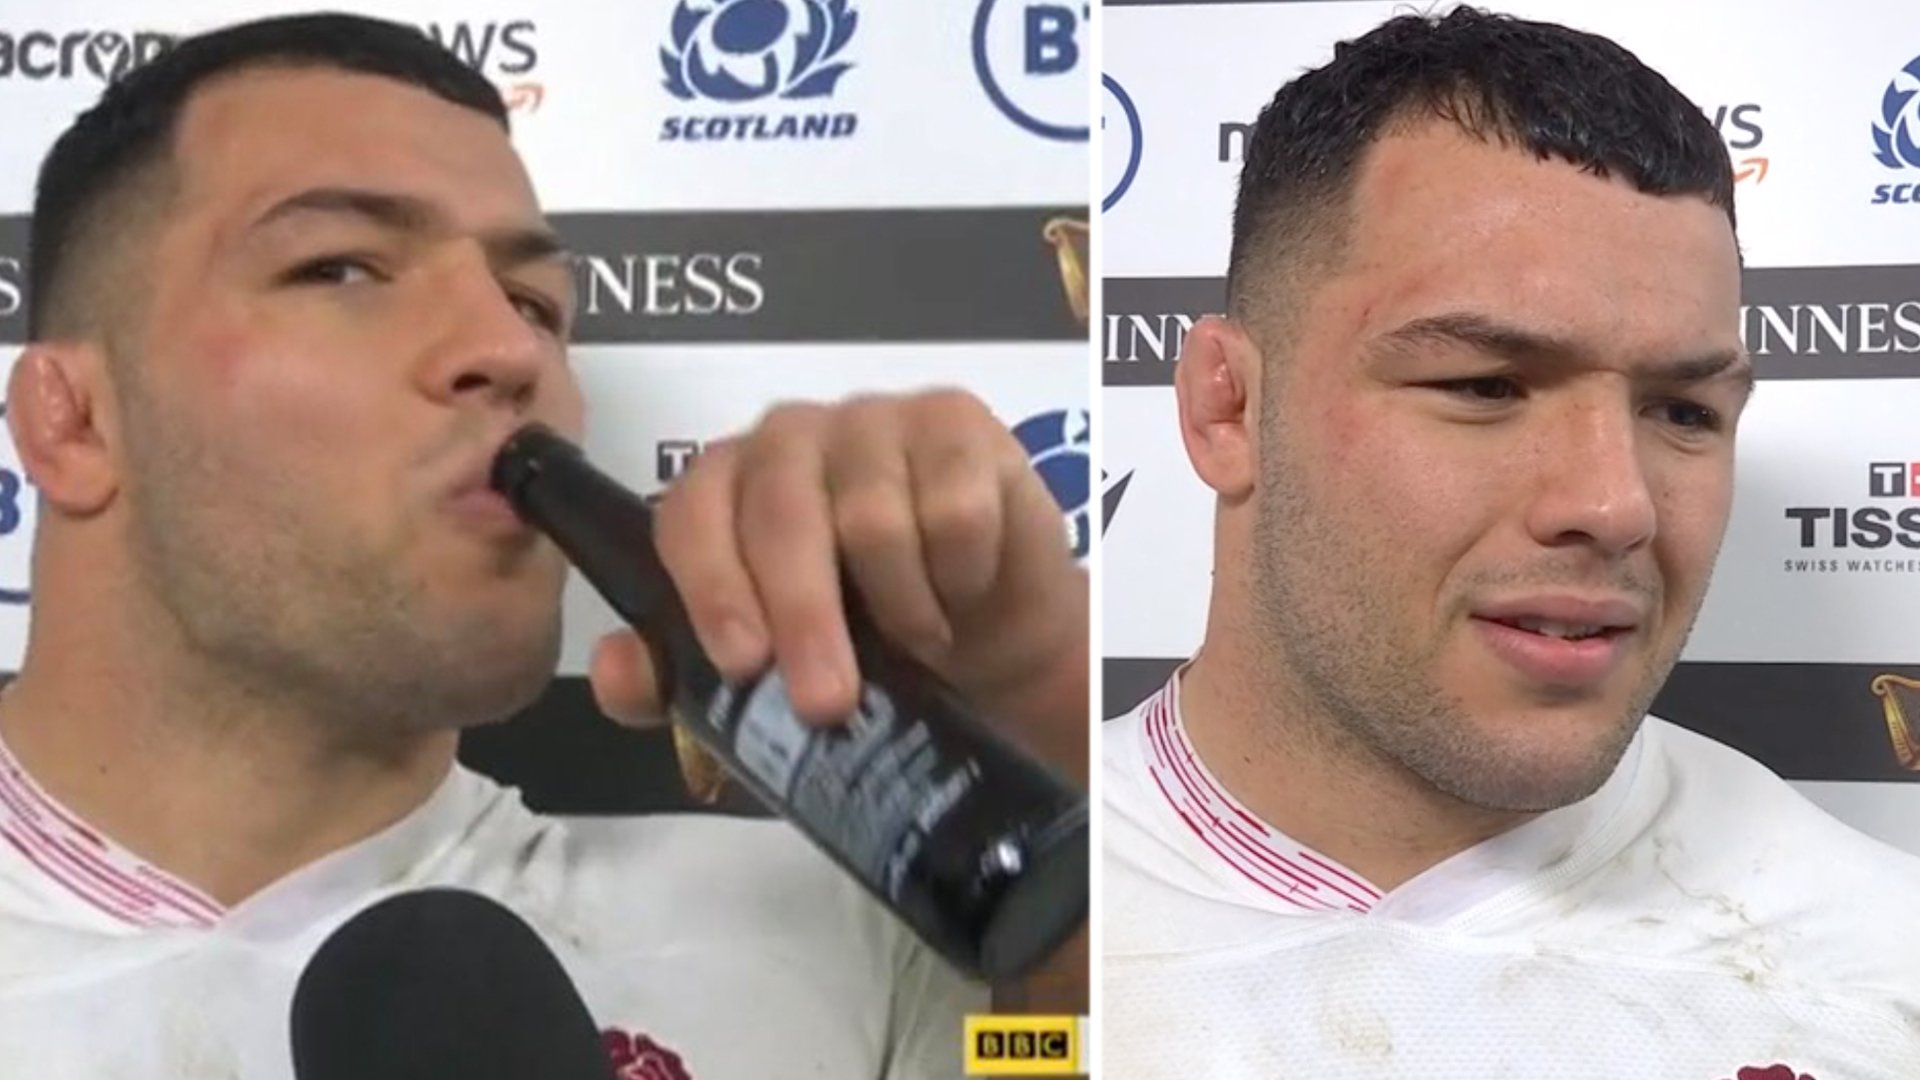 Ellis Genge gives one of the best post match interviews that we've seen